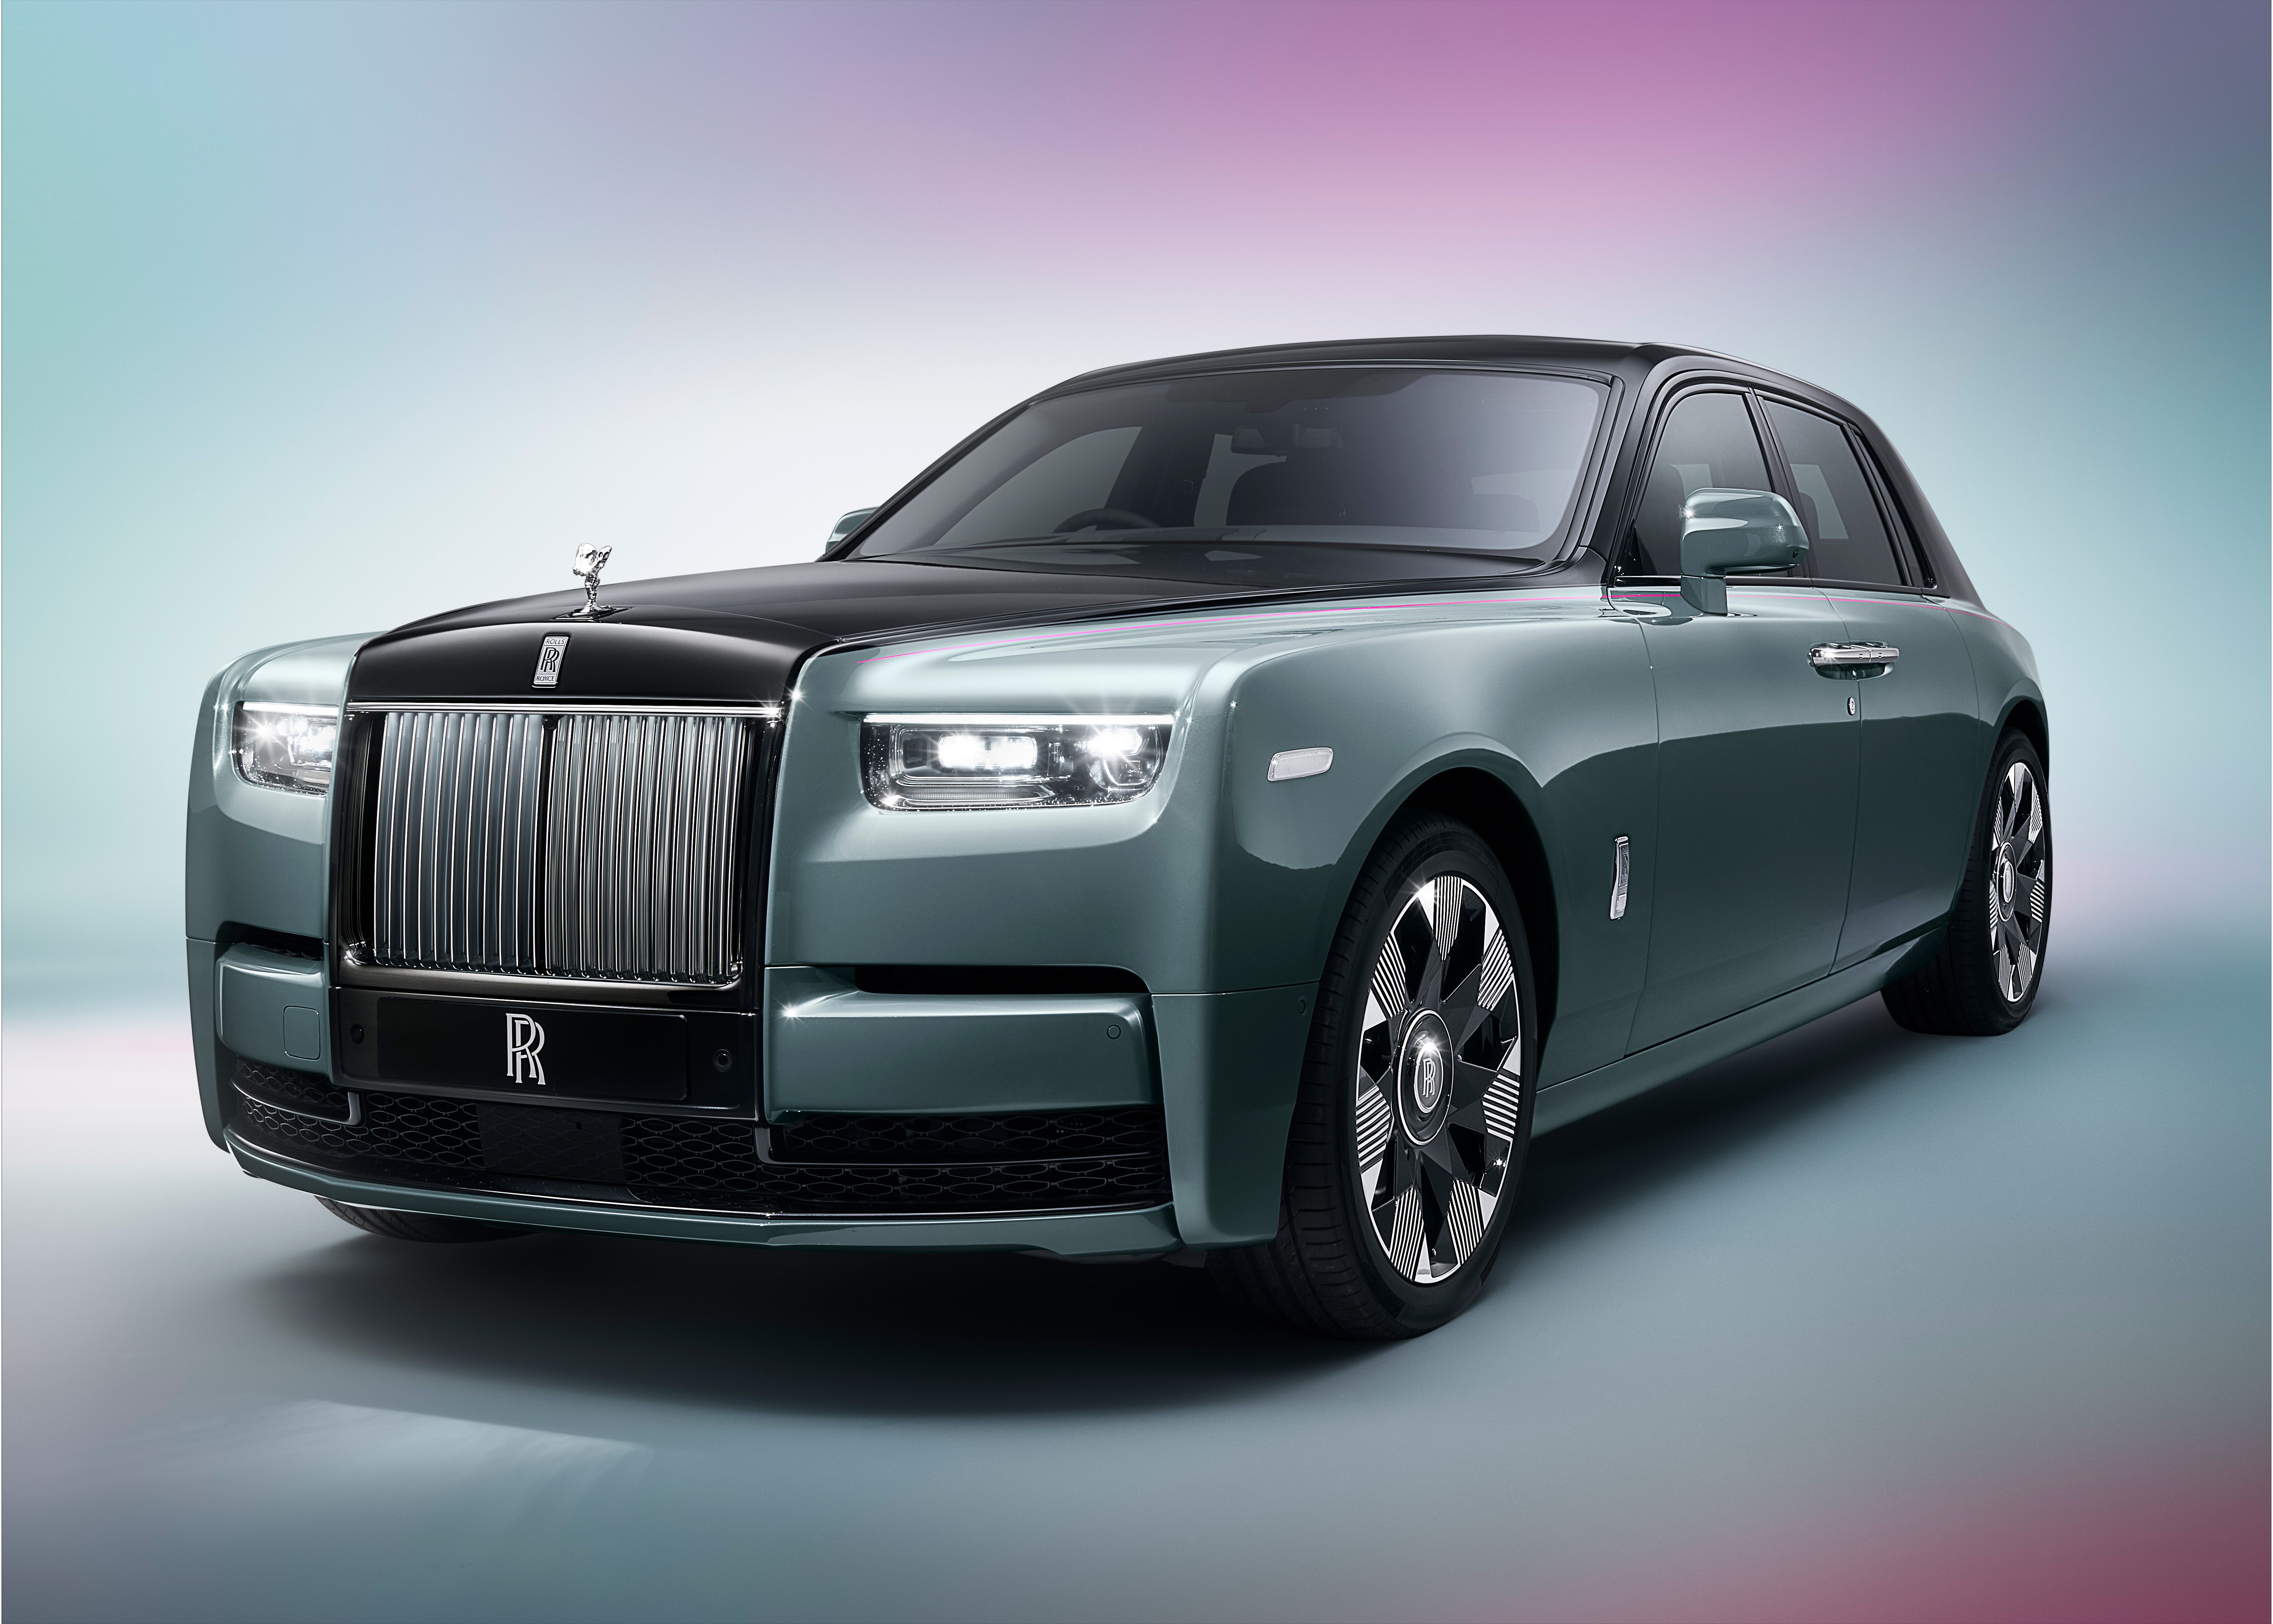 Cullinan And Ghost Models Are RollsRoyces Best selling Cars In 2021